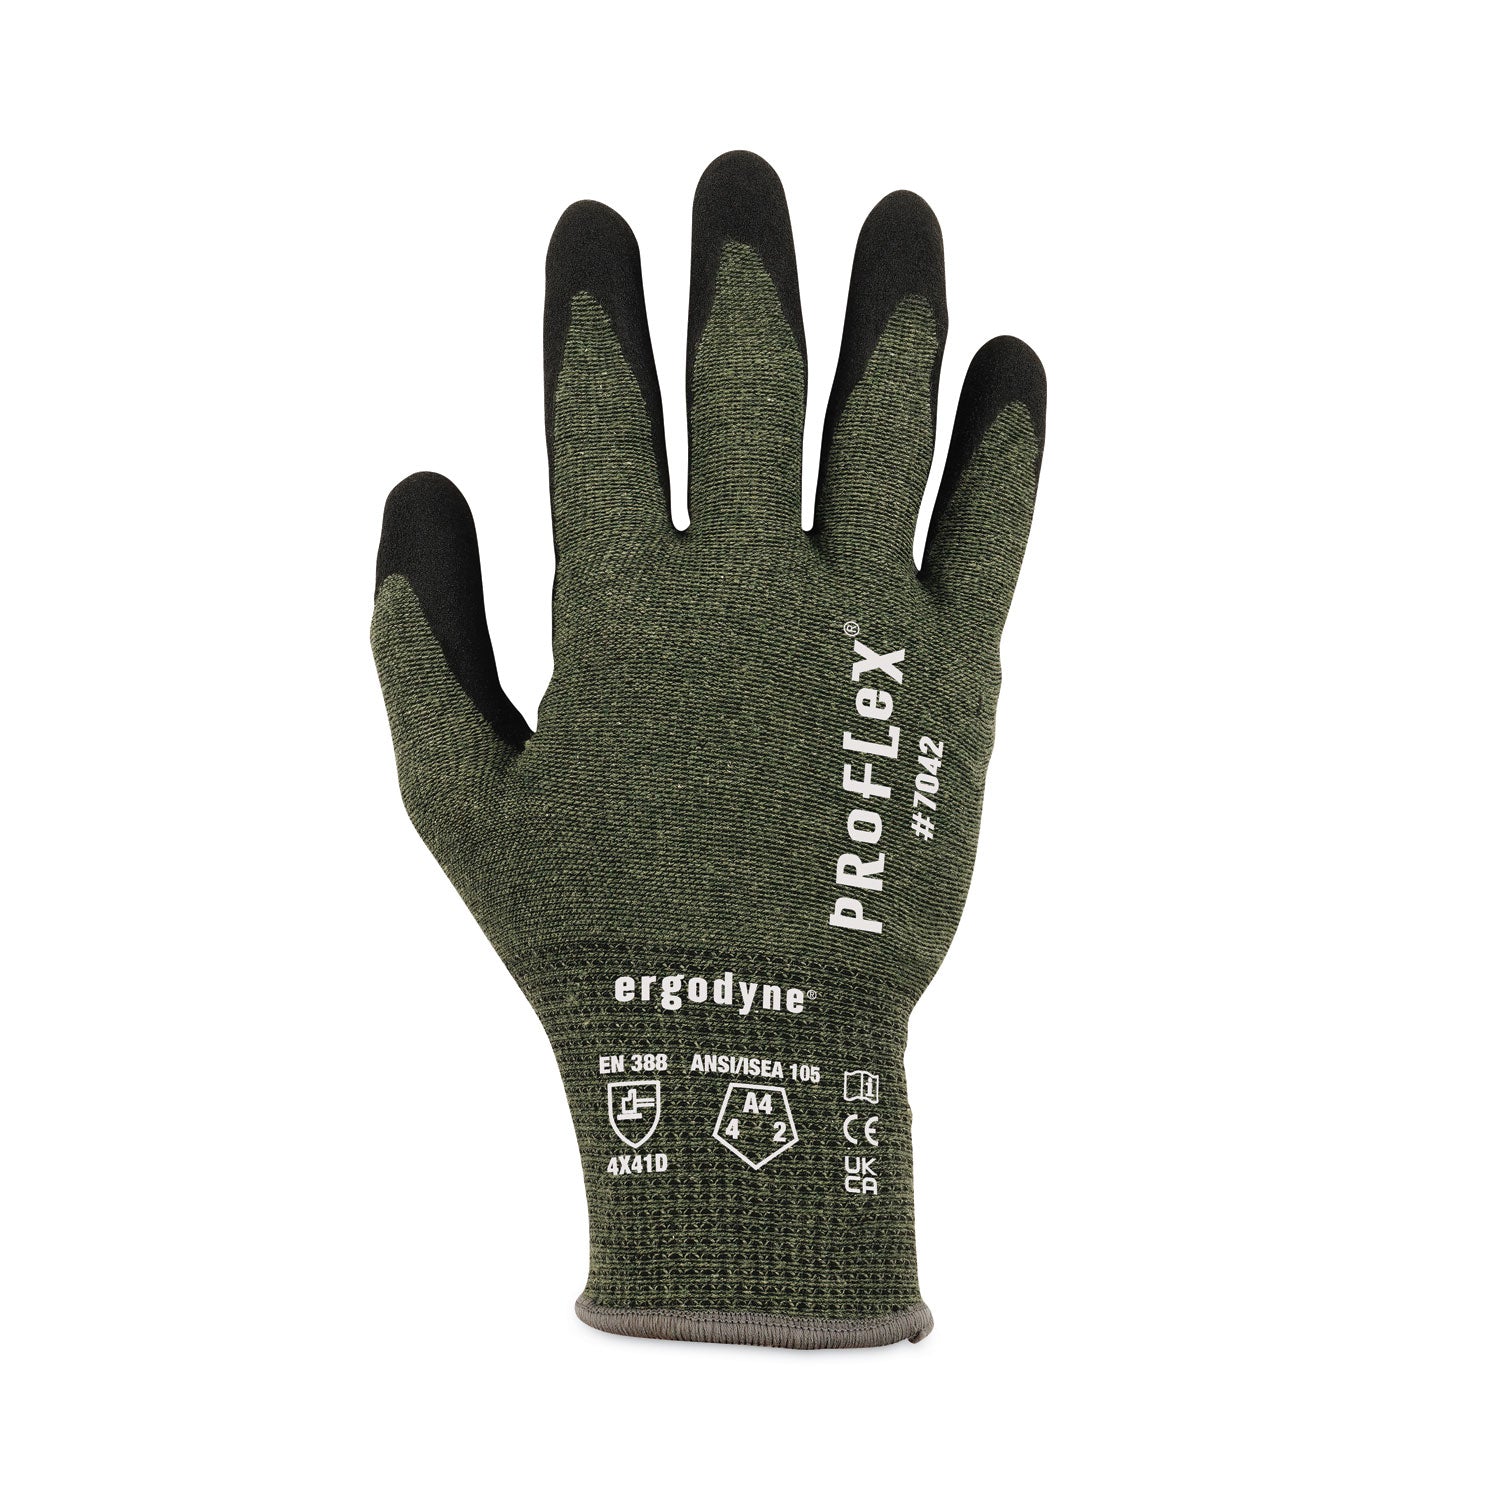 proflex-7042-ansi-a4-nitrile-coated-cr-gloves-green-2x-large-12-pairs-pack-ships-in-1-3-business-days_ego10336 - 2